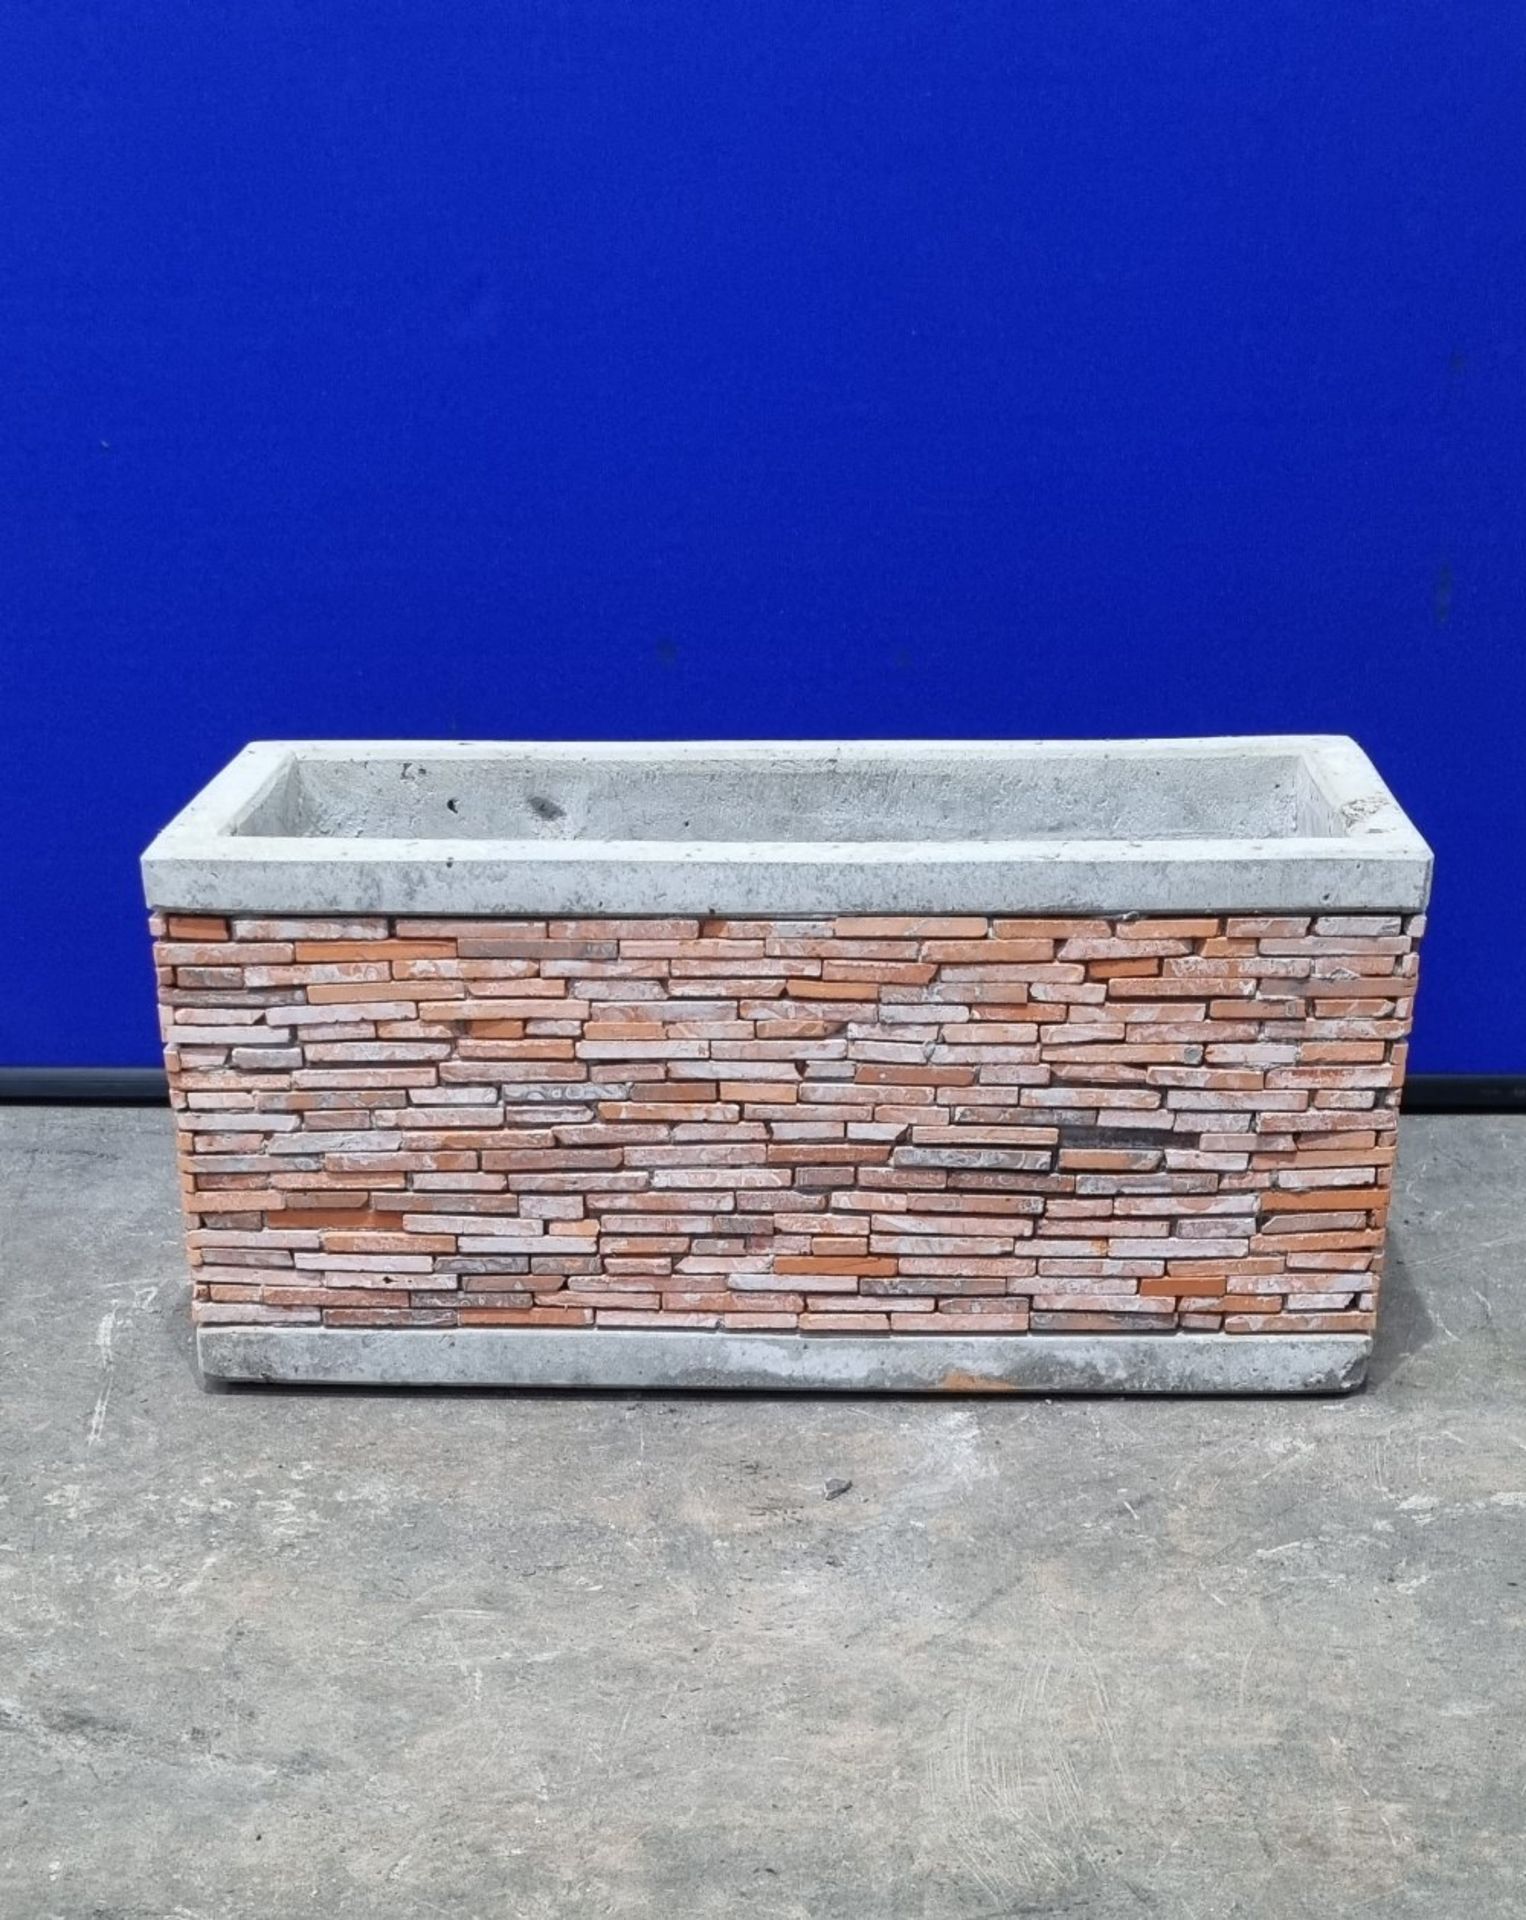 Mims Artisan Vintage Brick Collection 45093-S2 Planter | 495mm x 220mm | RRP £39.99